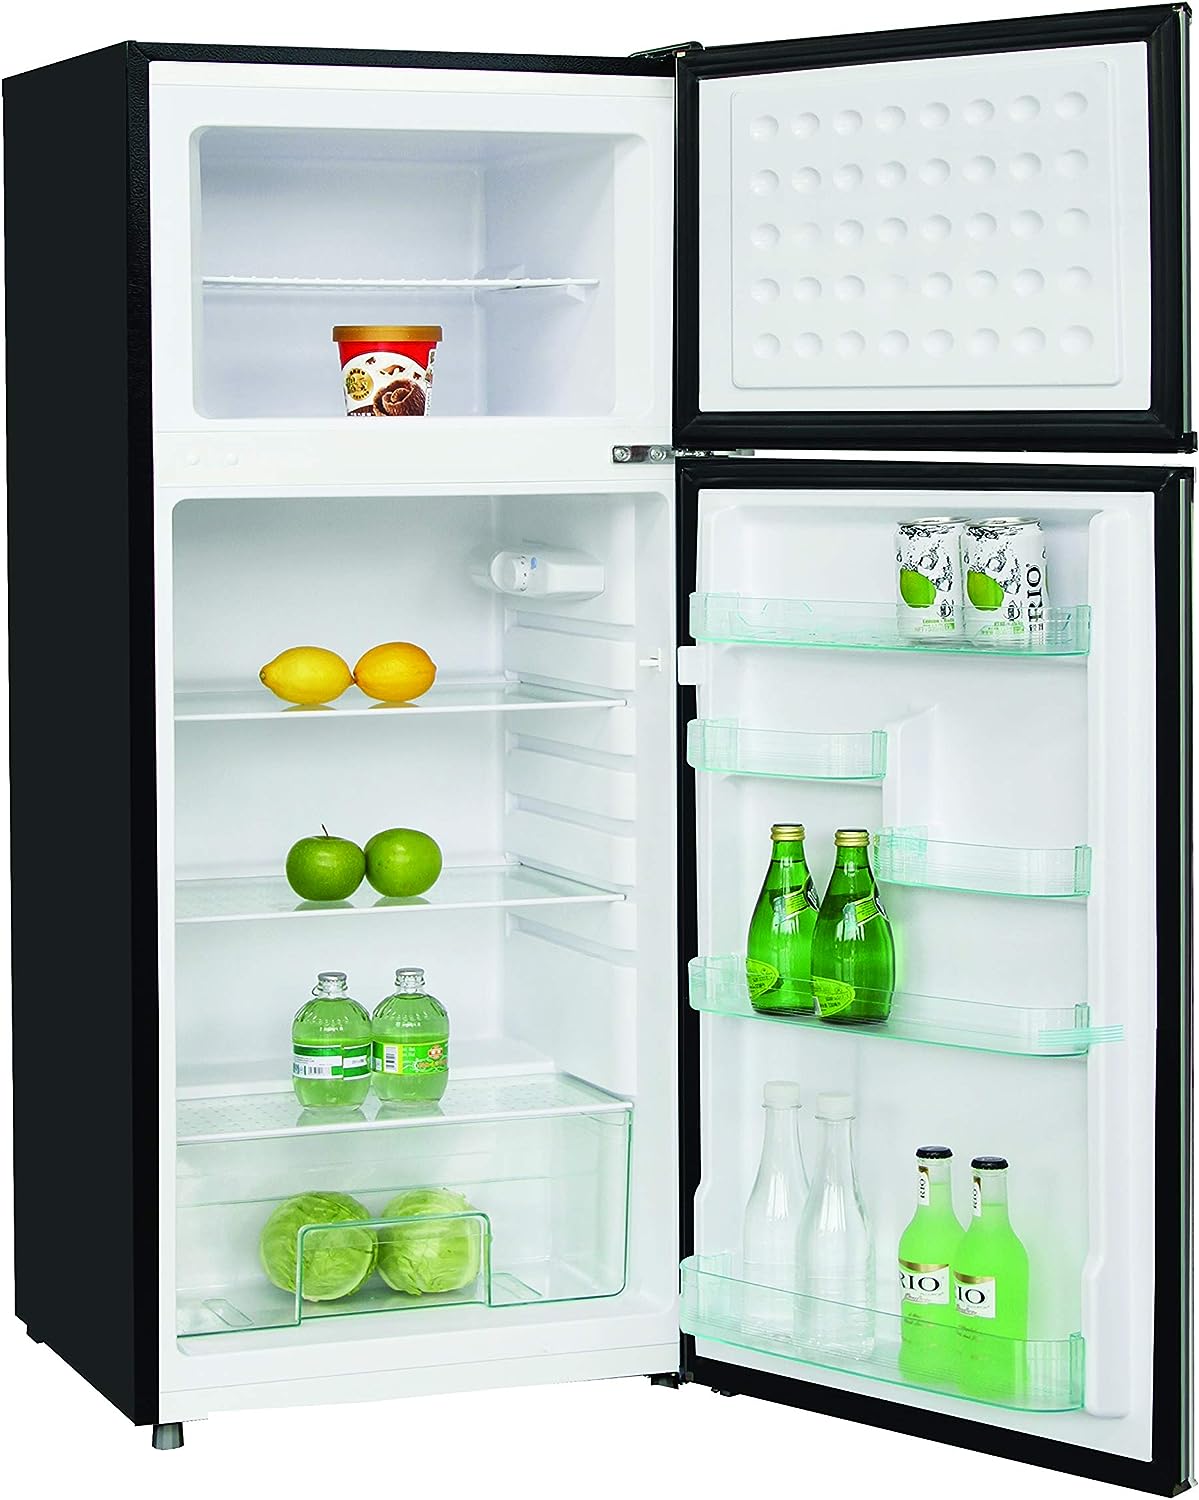 Like NEW - Frigidaire EFR751, 2 Door Apartment Size Refrigerator with Freezer, 7.5 cu ft, Platinum Series, Stainless Steel